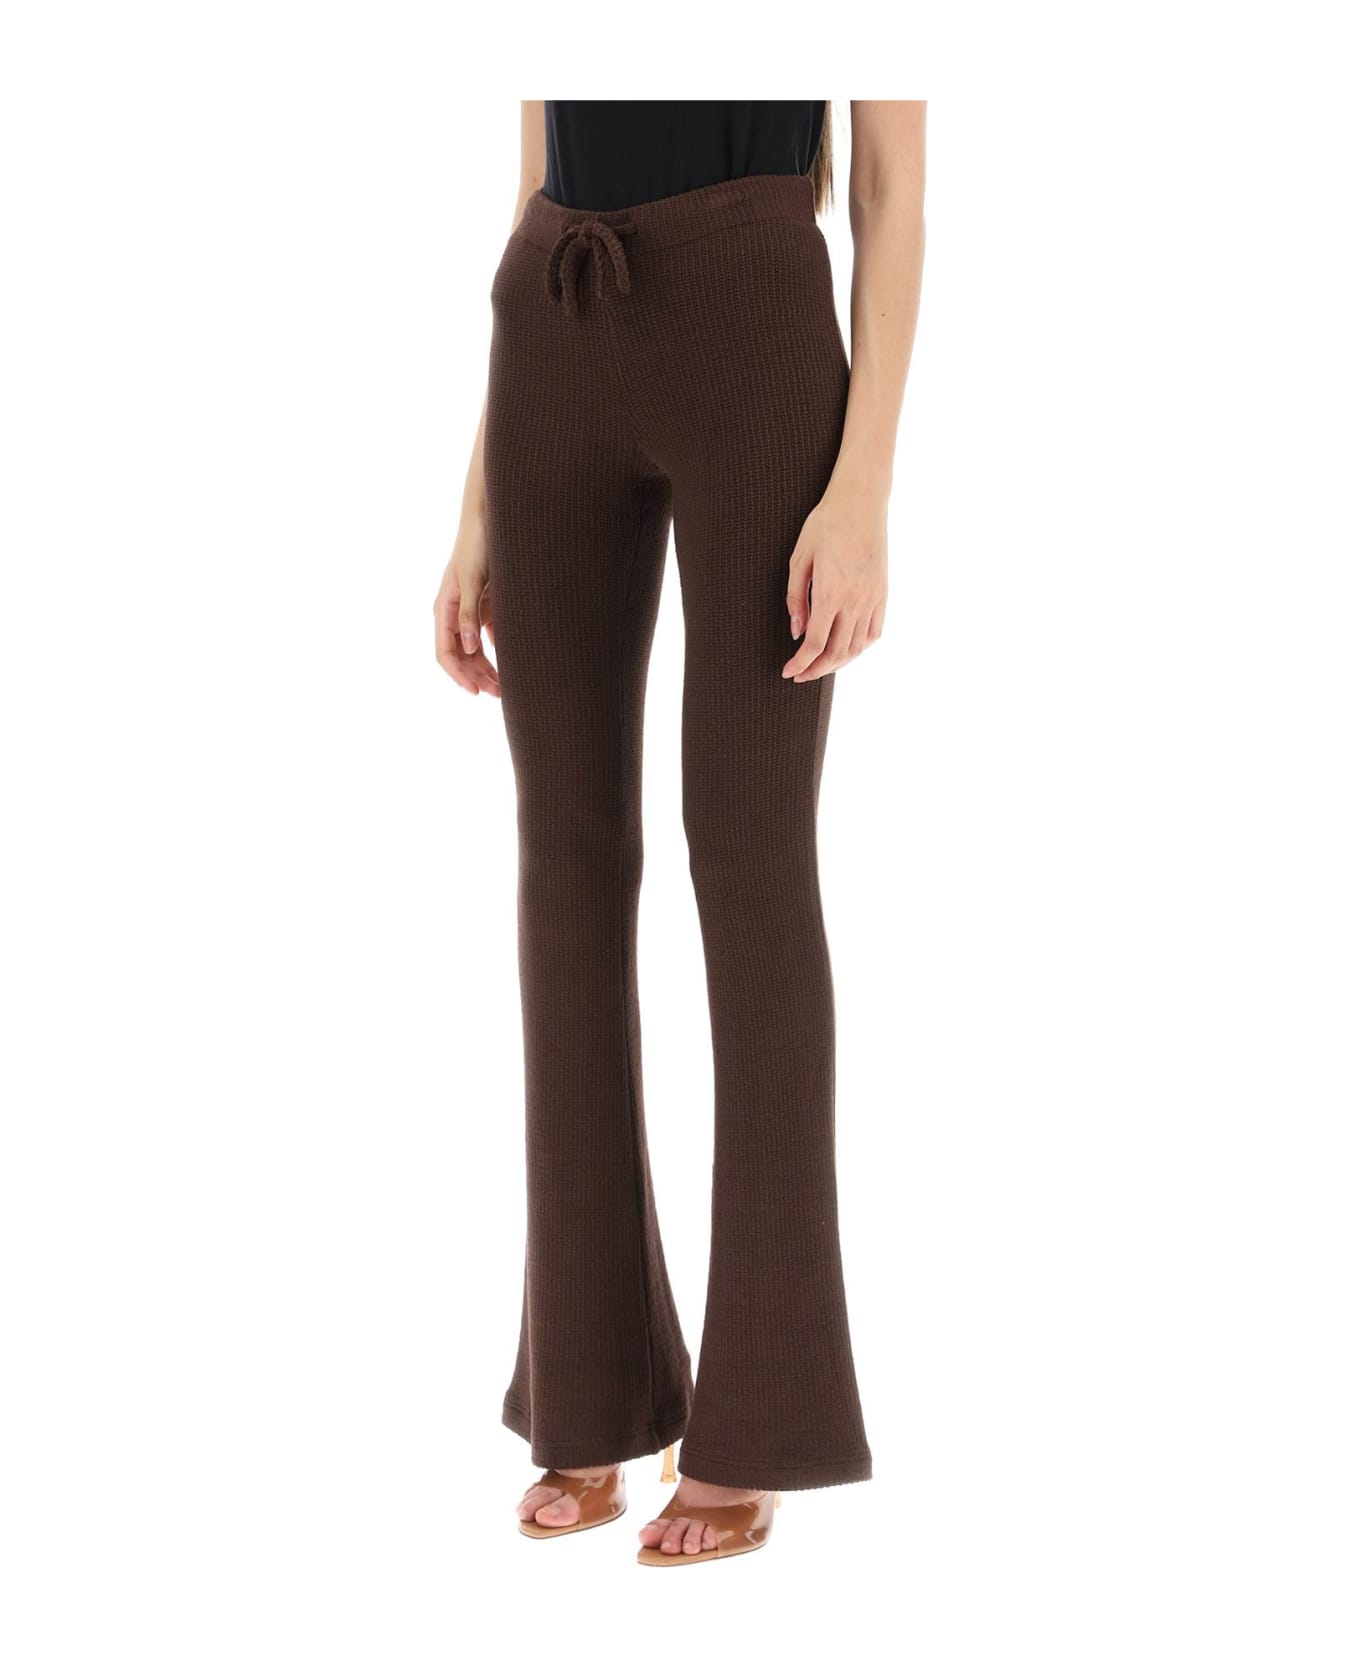 SIEDRES 'flo' Knitted Pants - Brown